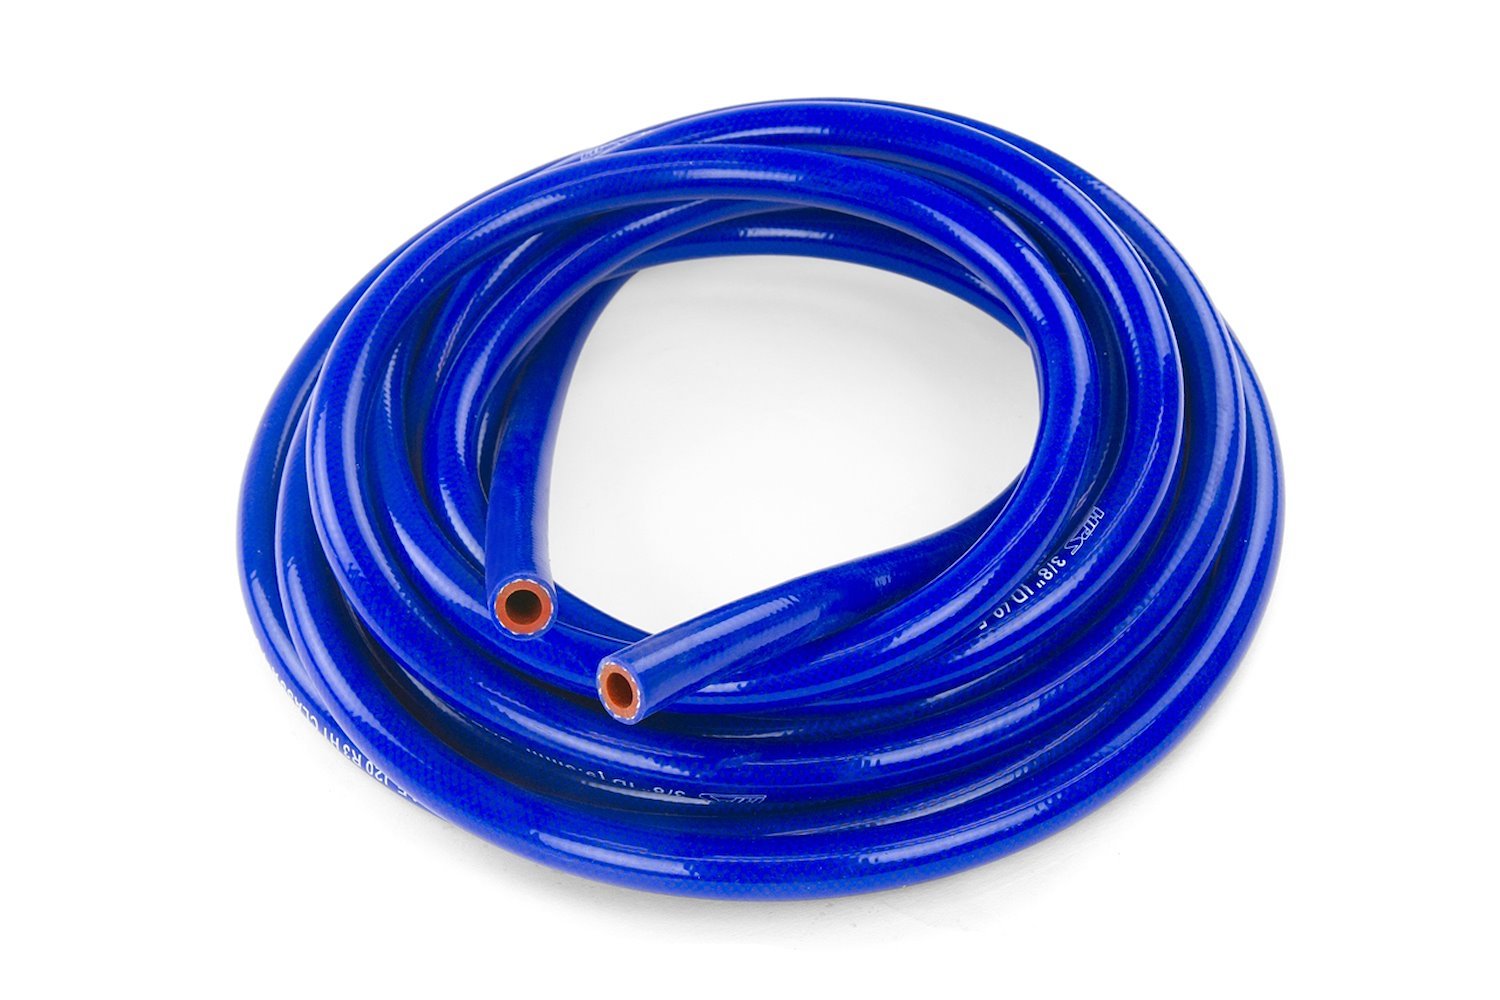 HTHH-025-BLUEx25 Silicone Heater Hose Tubing, High-Temp 1-Ply Reinforced, 1/4 in. ID, 25 ft. Roll, Blue